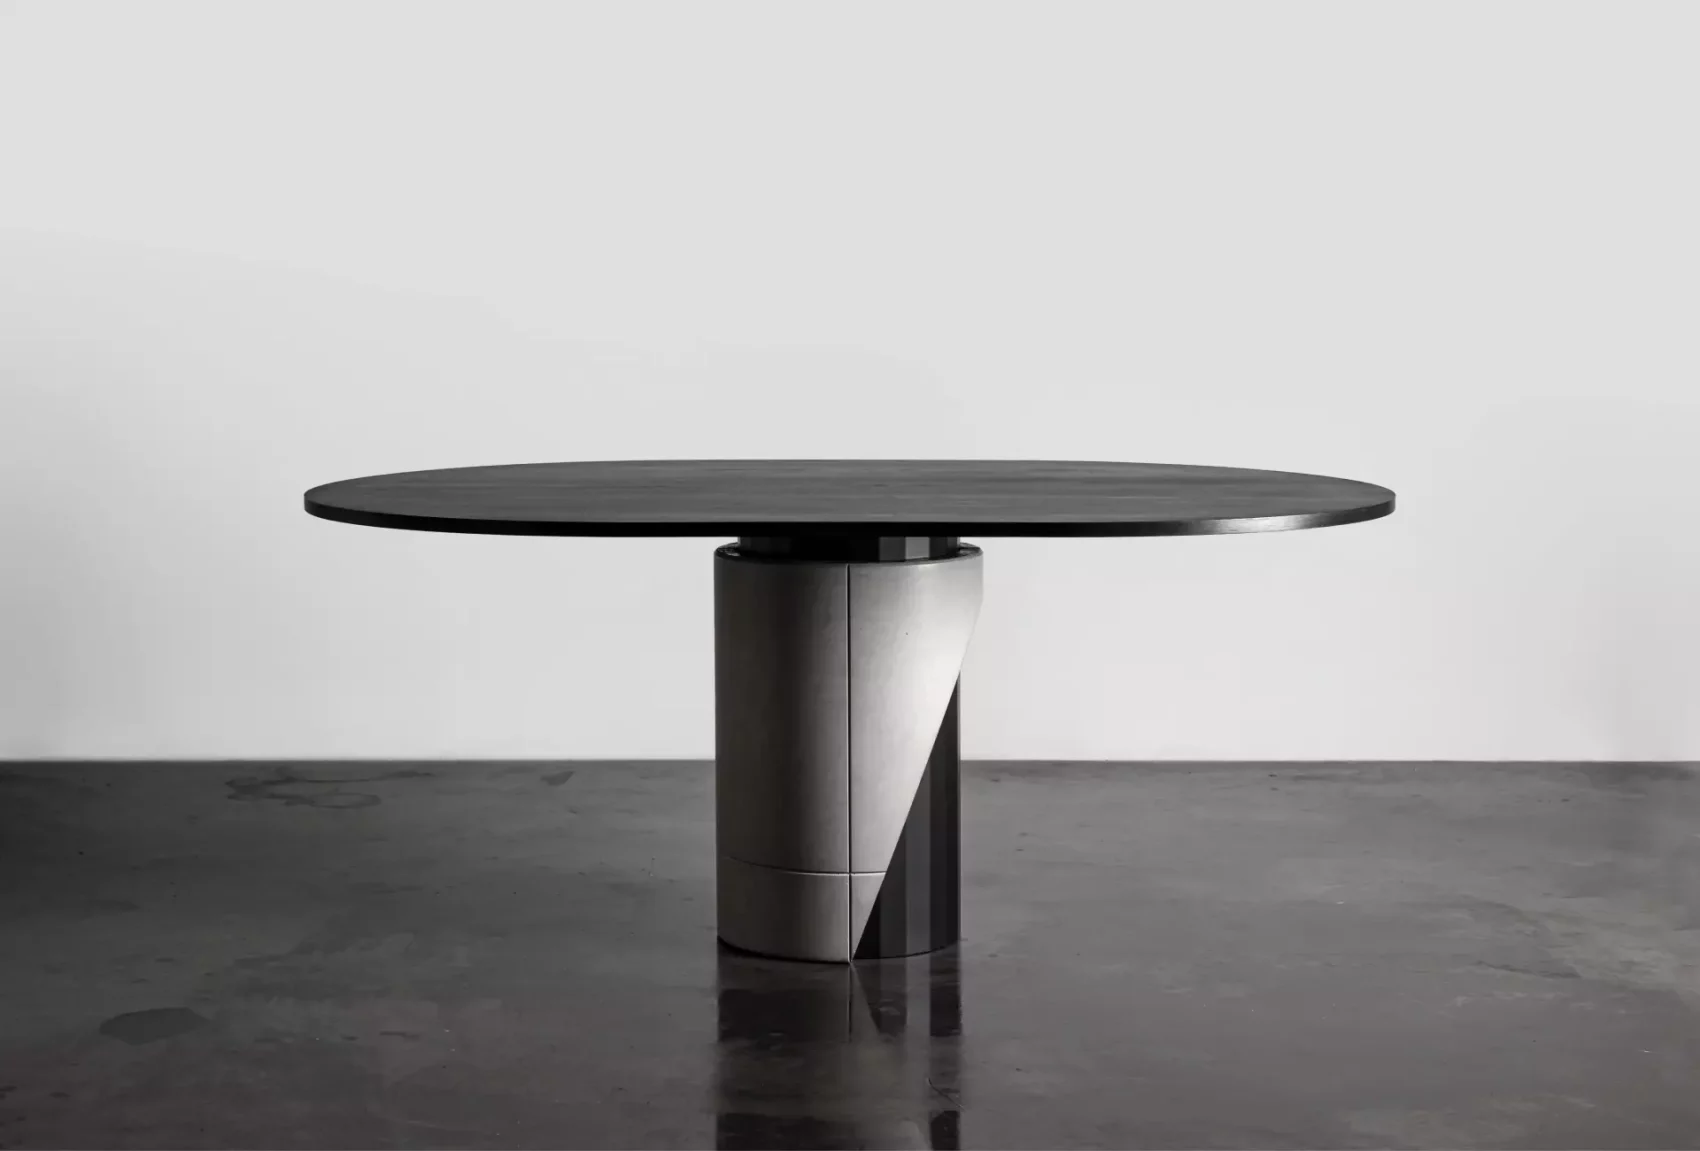 Majestic Dining table for 6 to 8 people black tinted wooden table top and metal and concrete foot for a modern and brutalist style